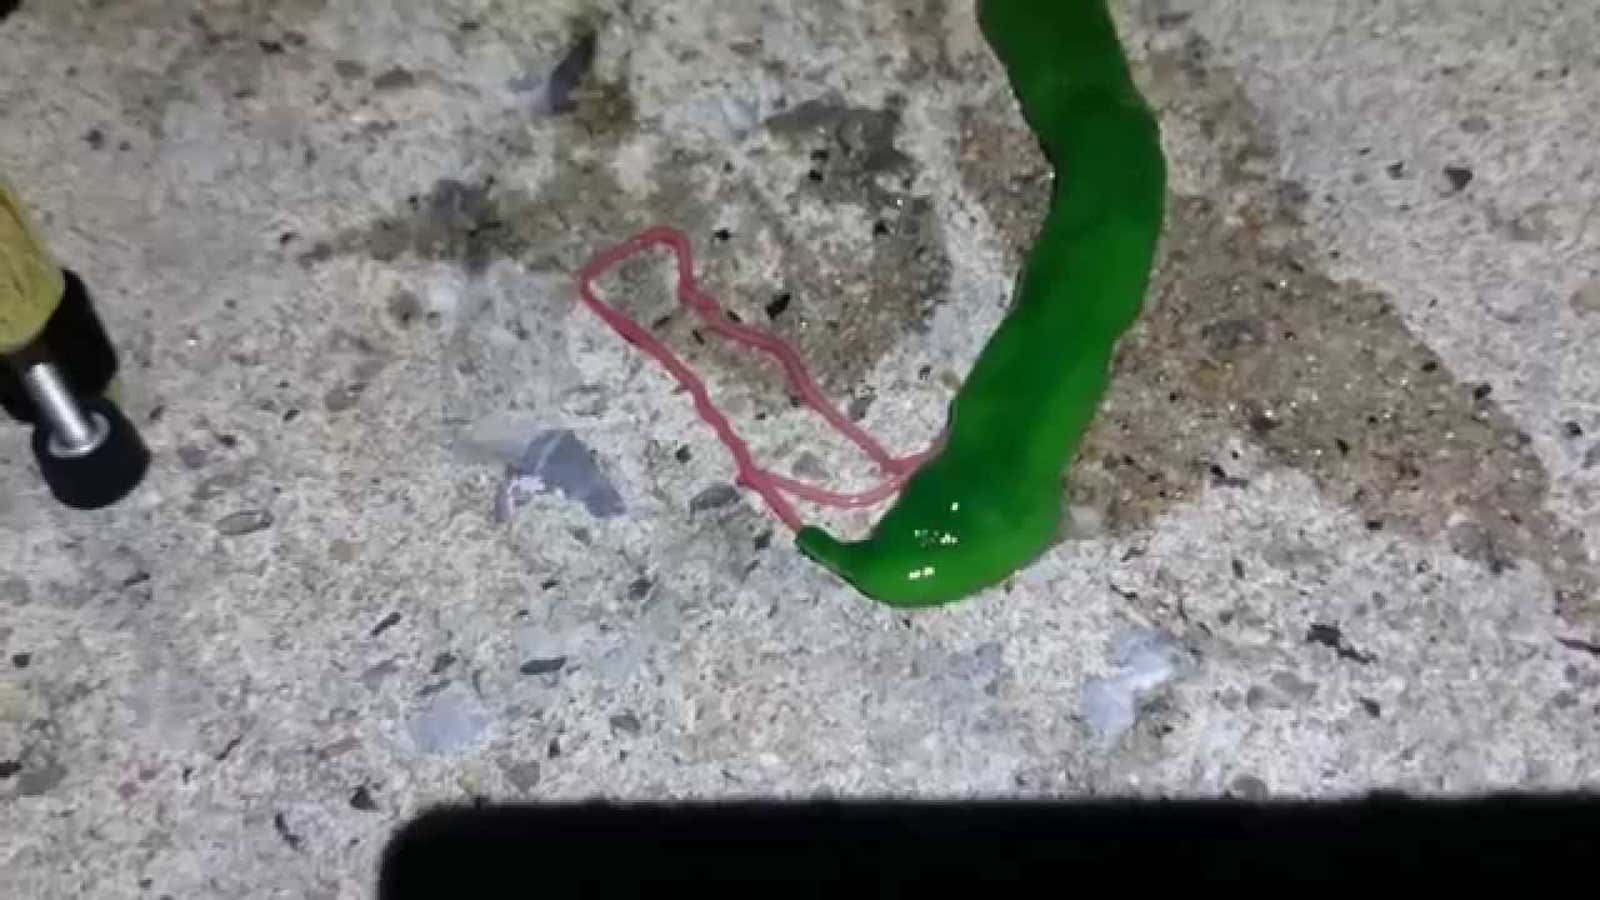 Watch: A bizarre green slime-beast slithers around flicking its toxic tongue-like appendage